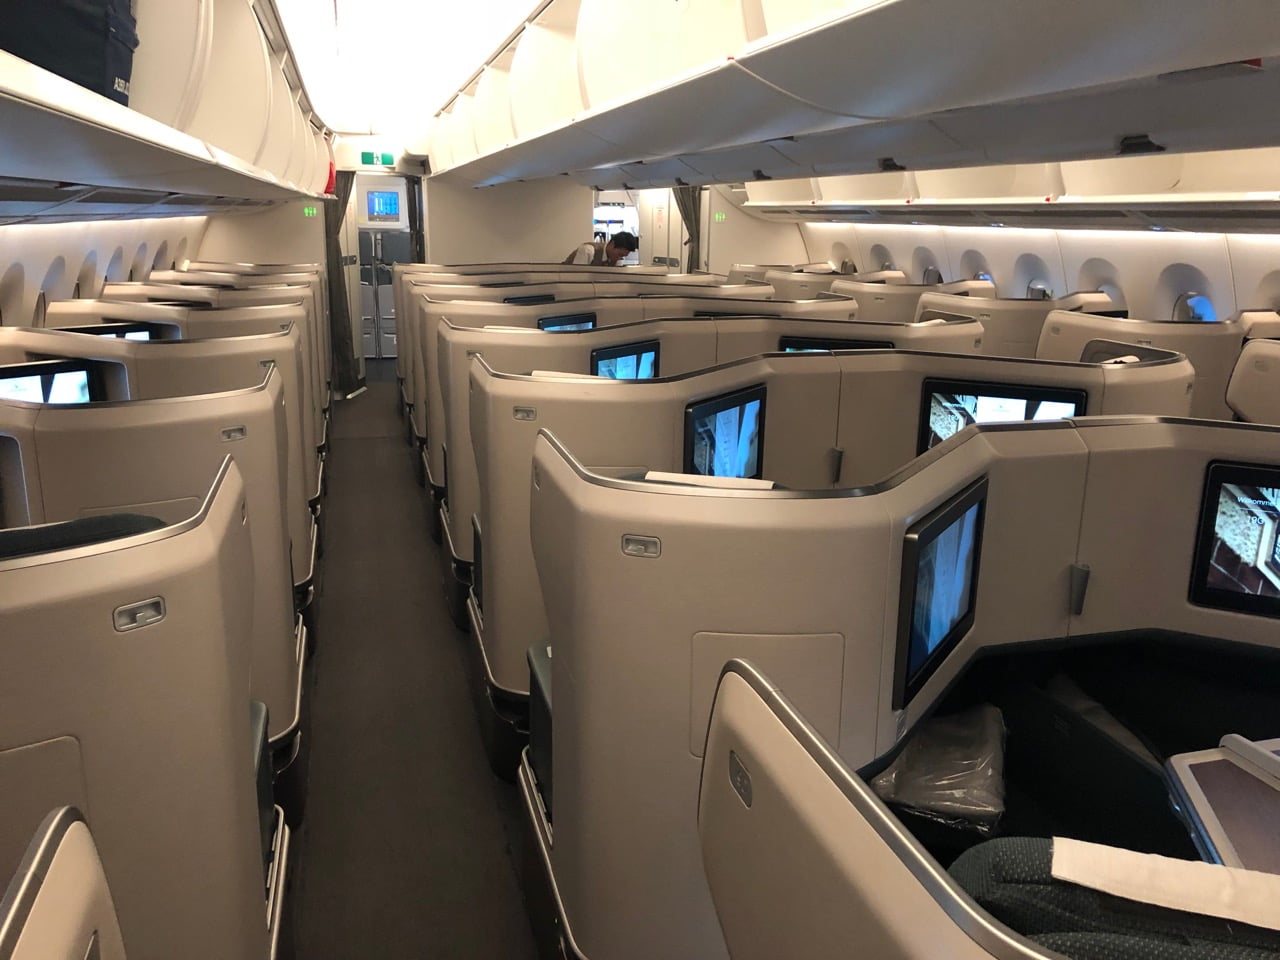 Cathay Pacific Business class review in 2018